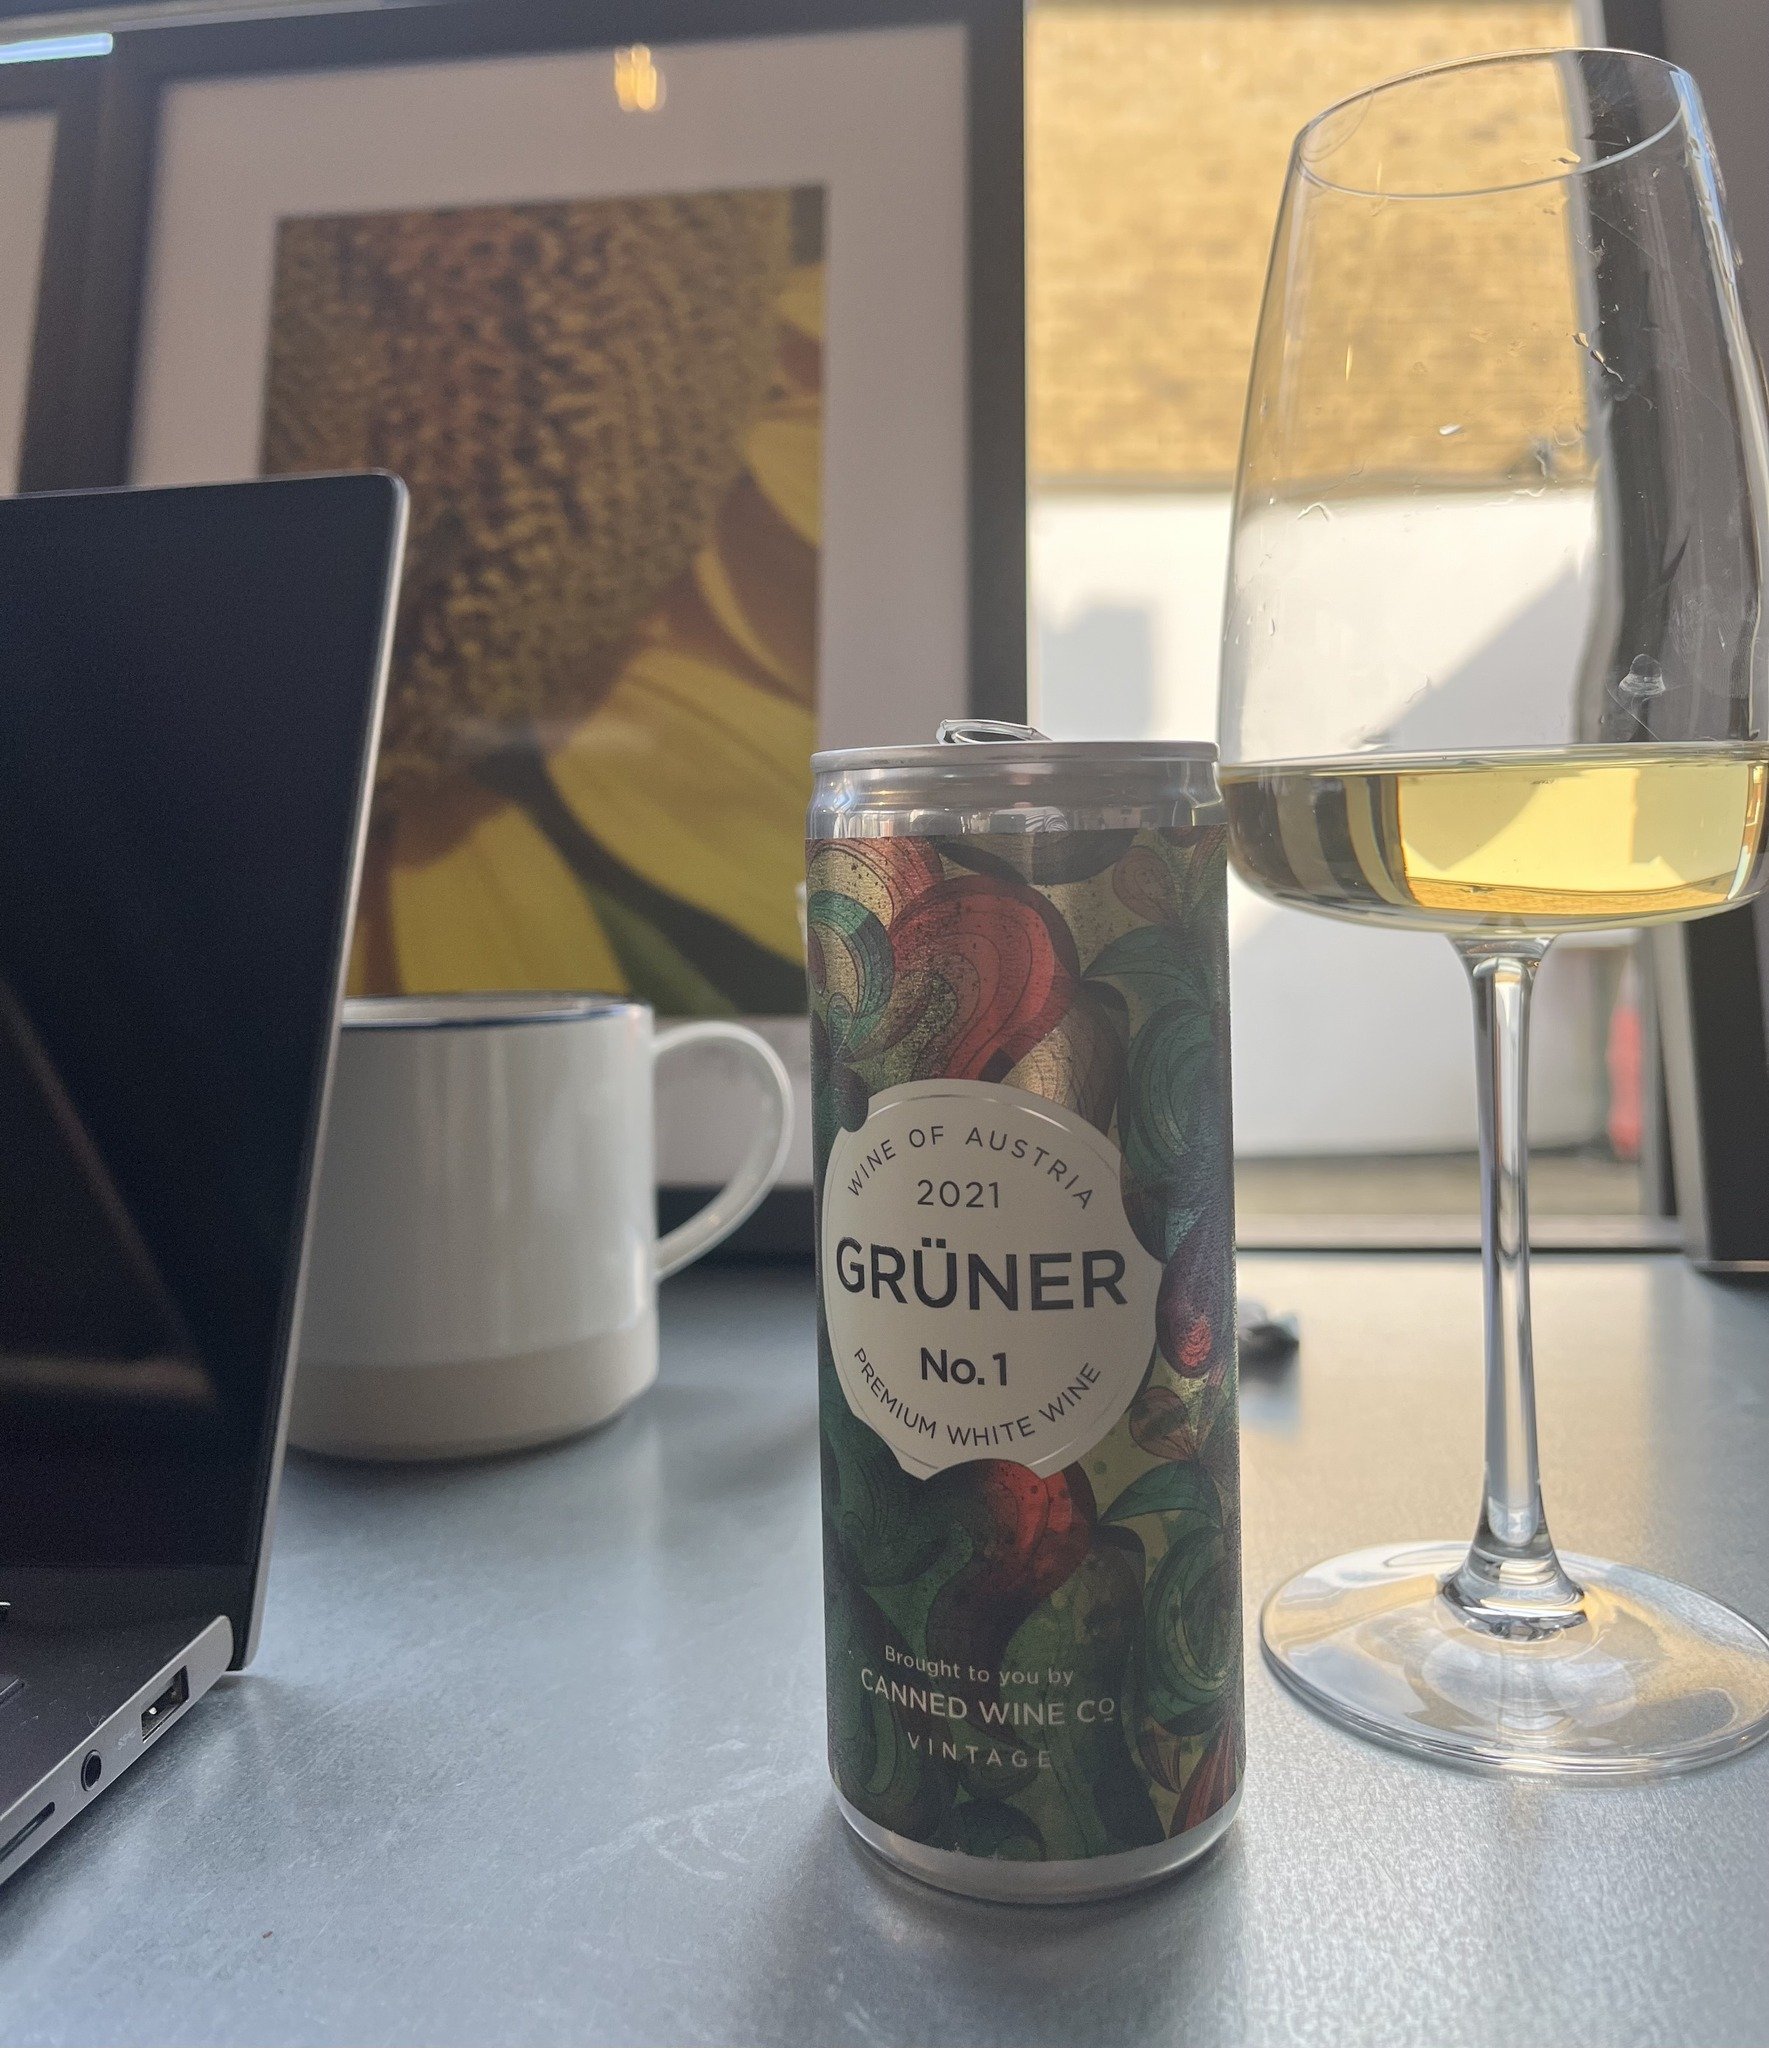 It's Friday afternoon and this is how we roll! 

If you haven't tried one, we can highly recommend @cannedwinecompany wines which can be enjoyed here.

#winetime #winetime🍷 #winetime🍷🍷 #coworkinglife #coworkingspace #coworking #coworkingspaces  #c